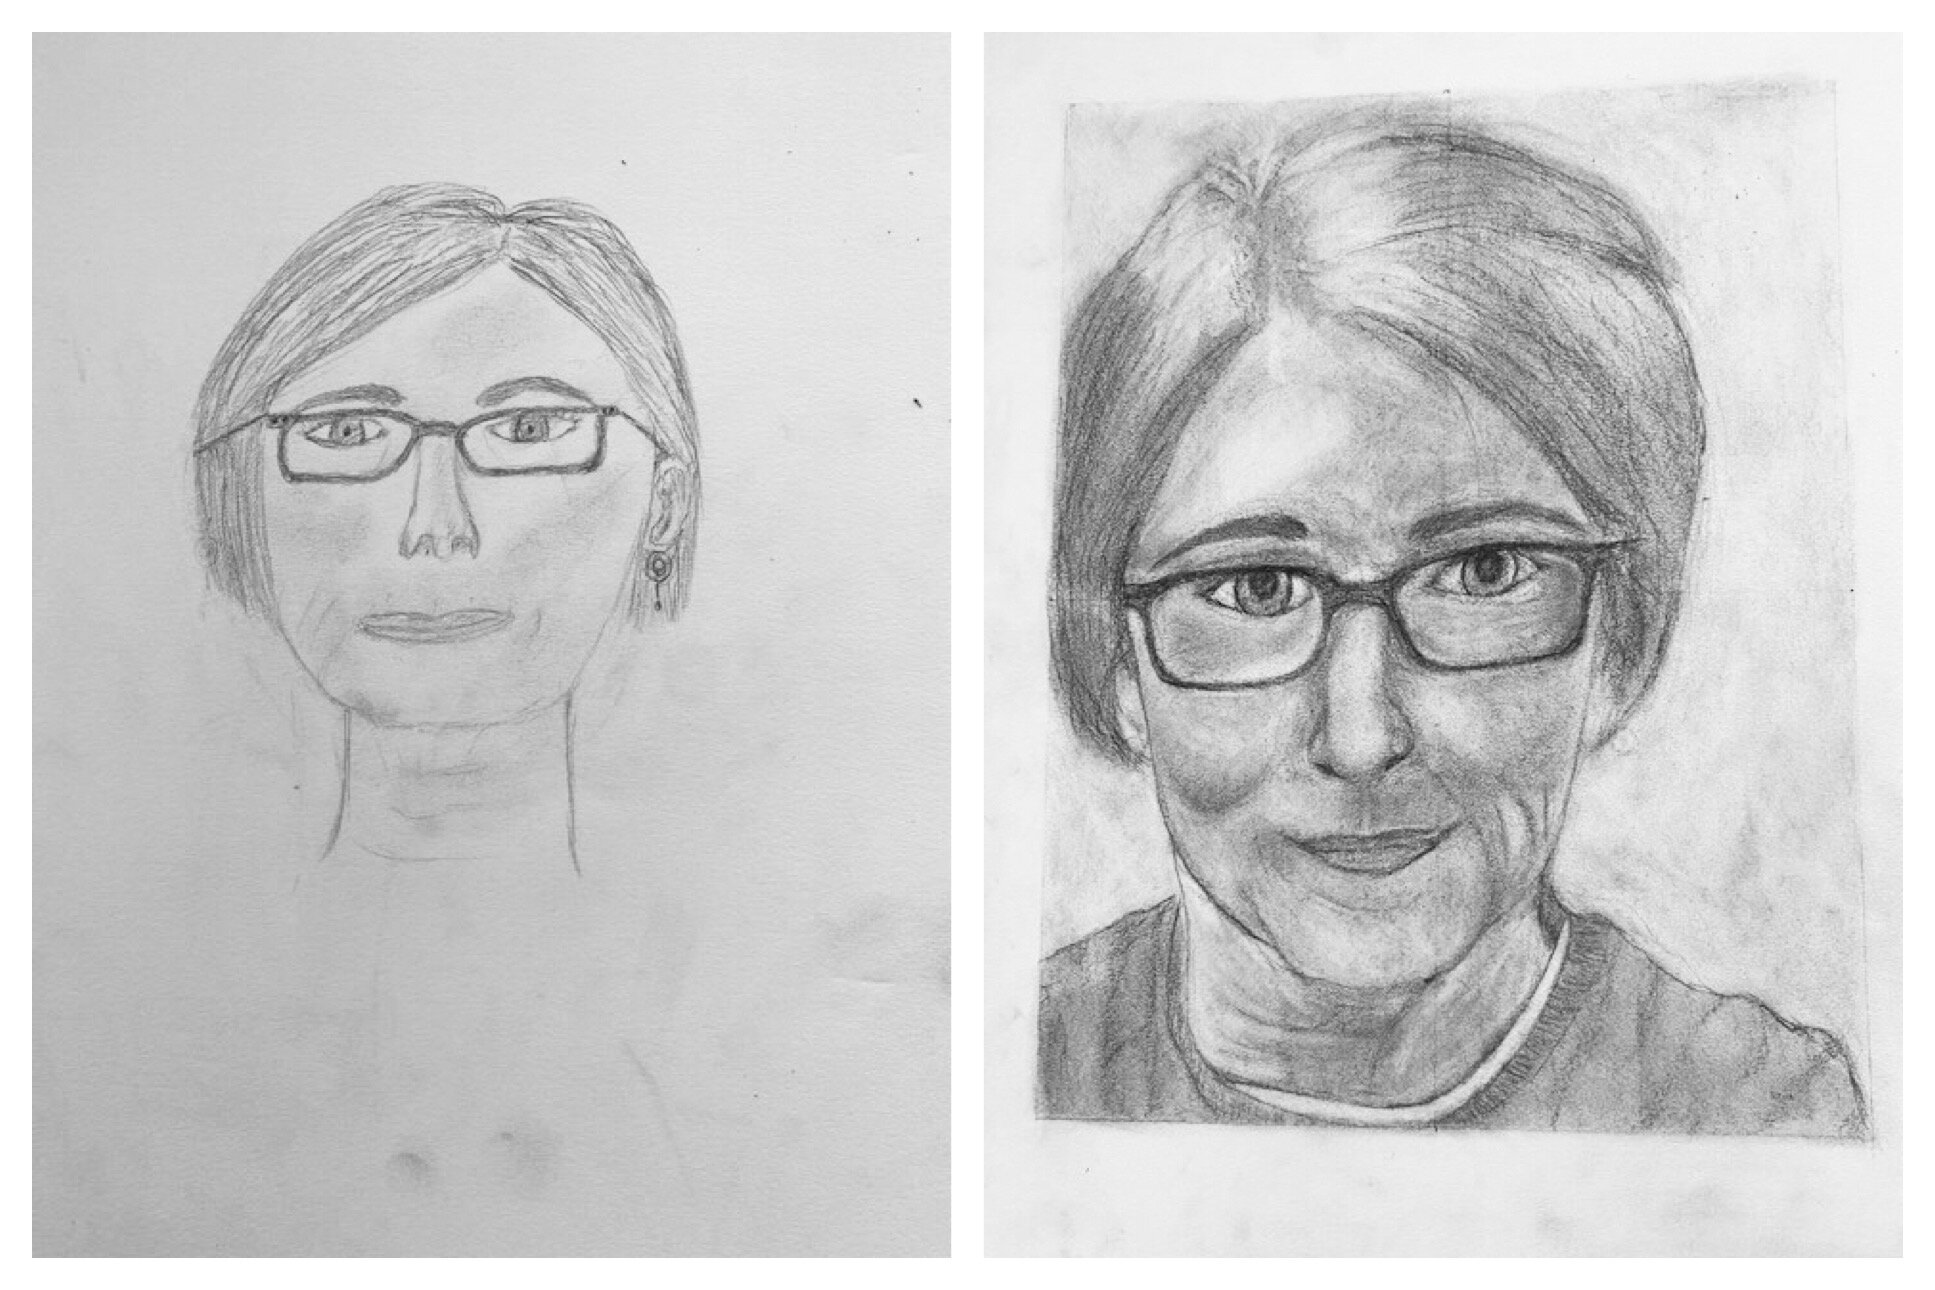 Nancy's Before and After Drawings